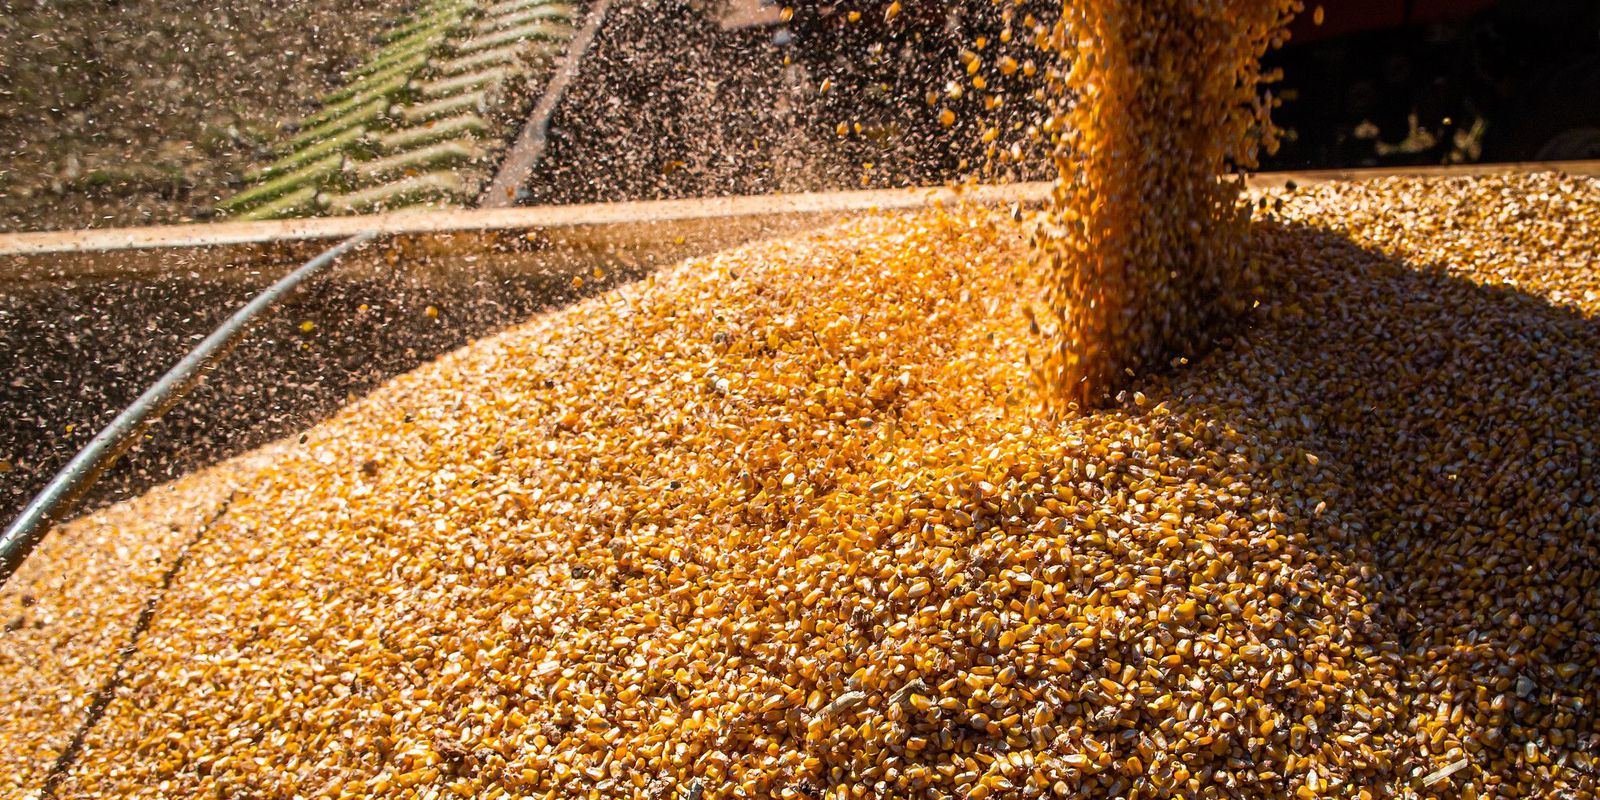 Grain production is expected to reach 312.4 million tons in 2023